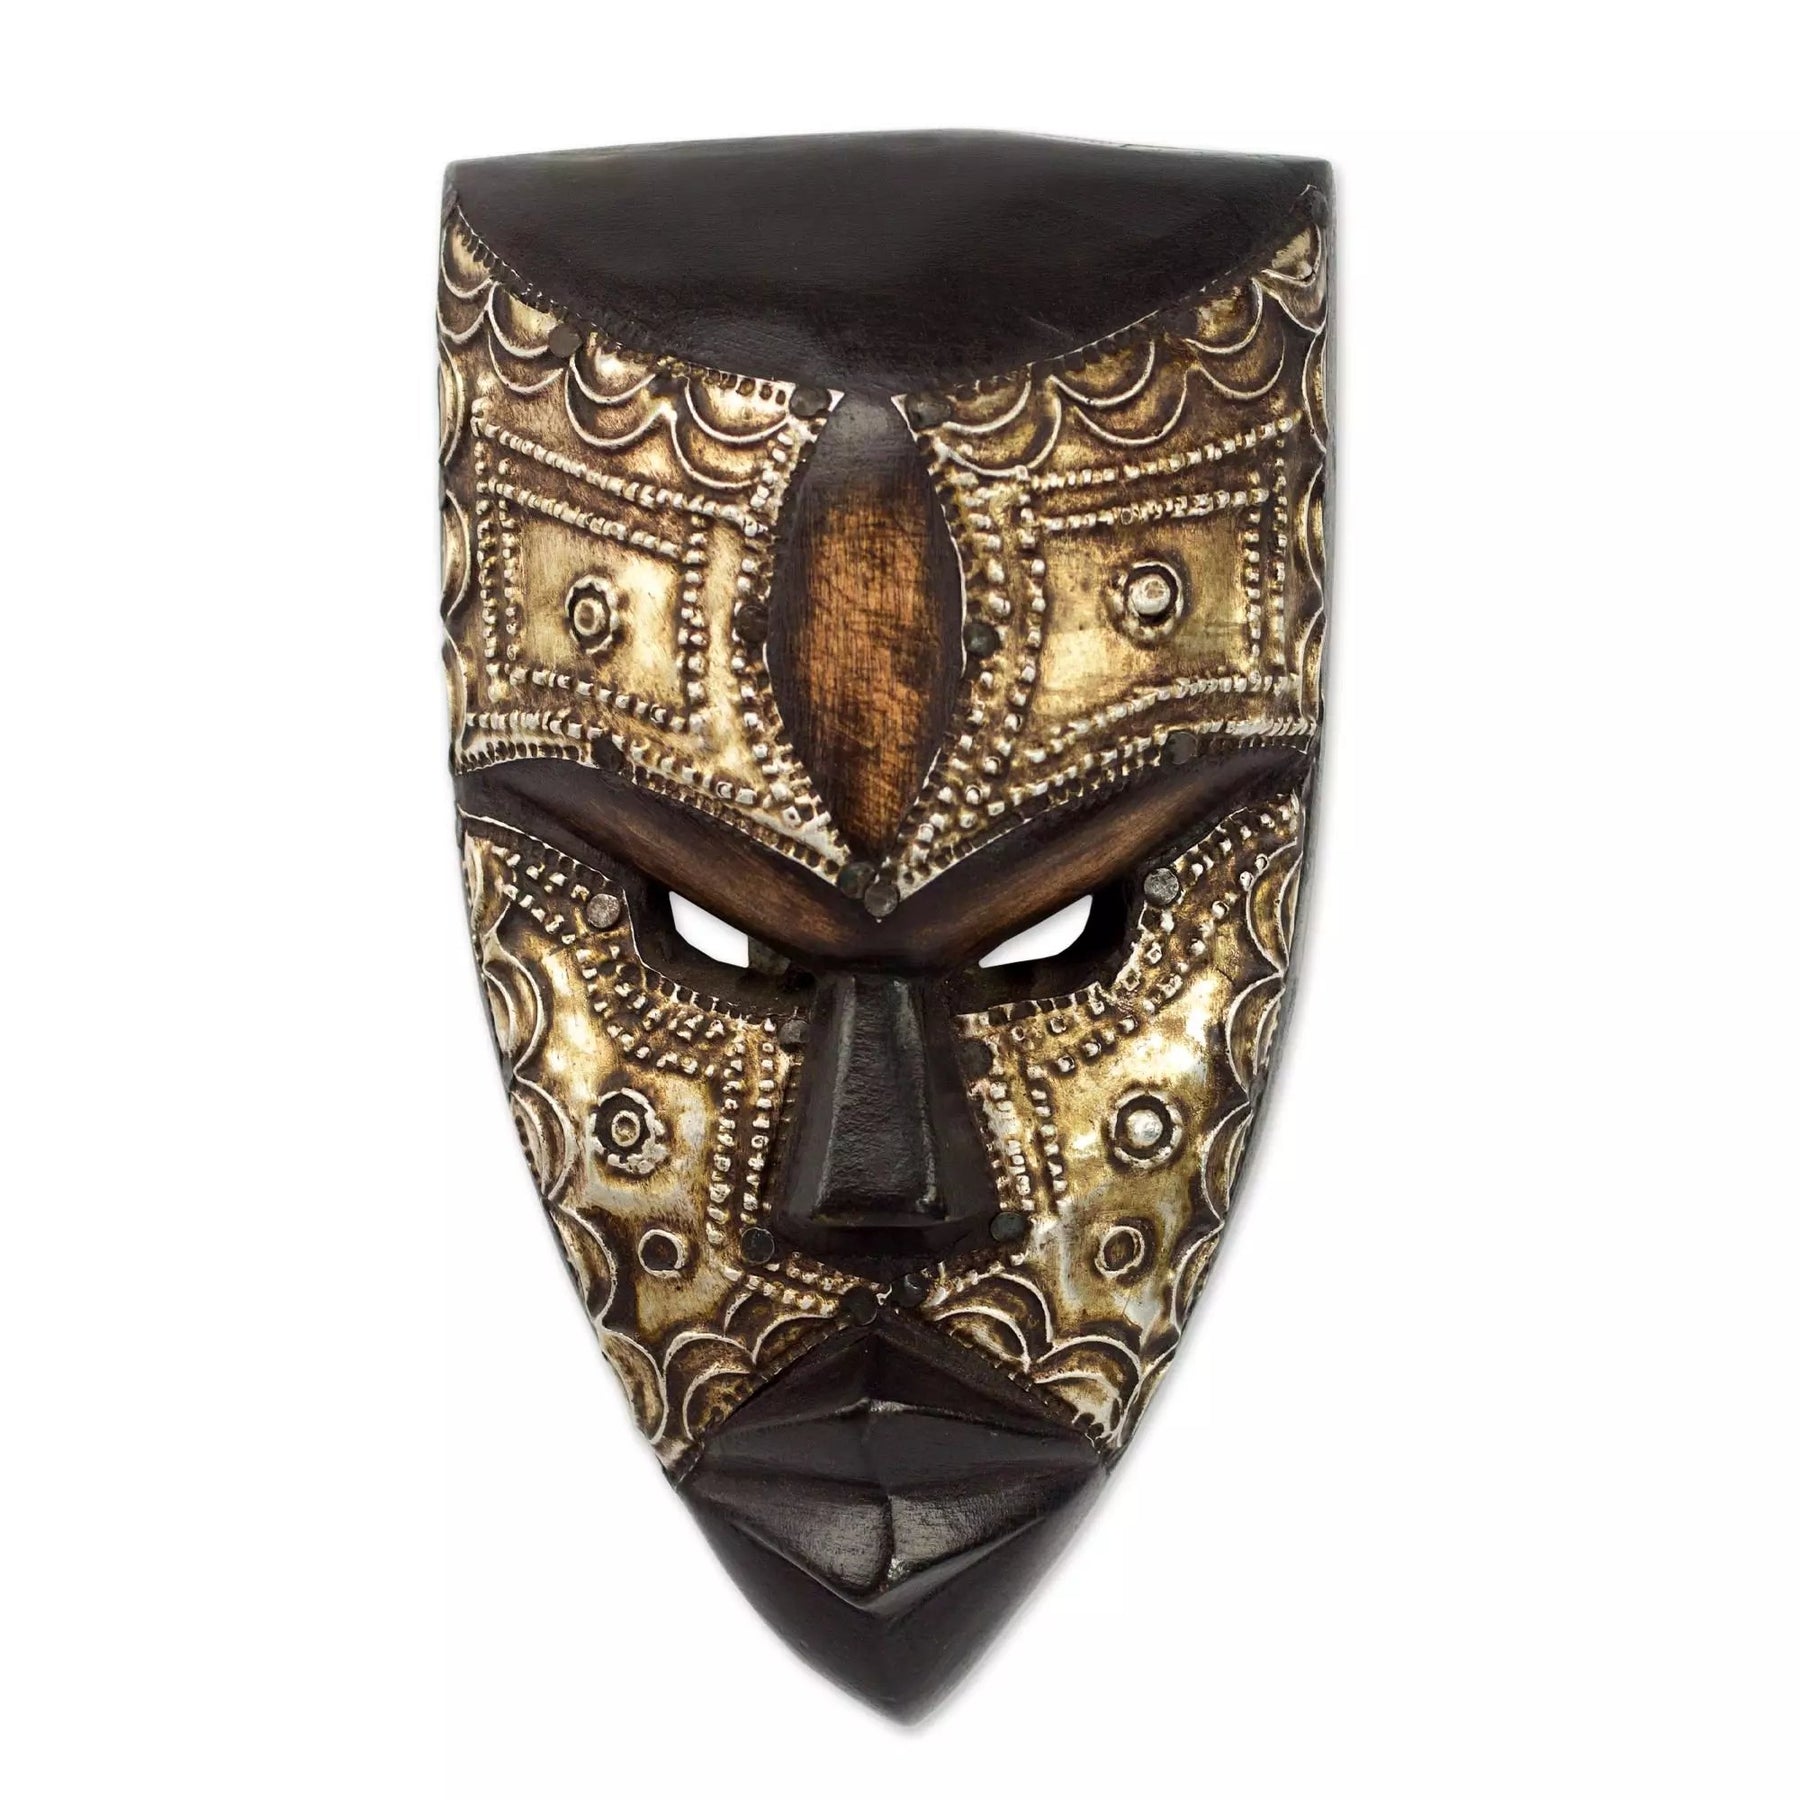 1 of 3: Authentic African Hand Made Mbara Hunter Mask by Awudu Saaed